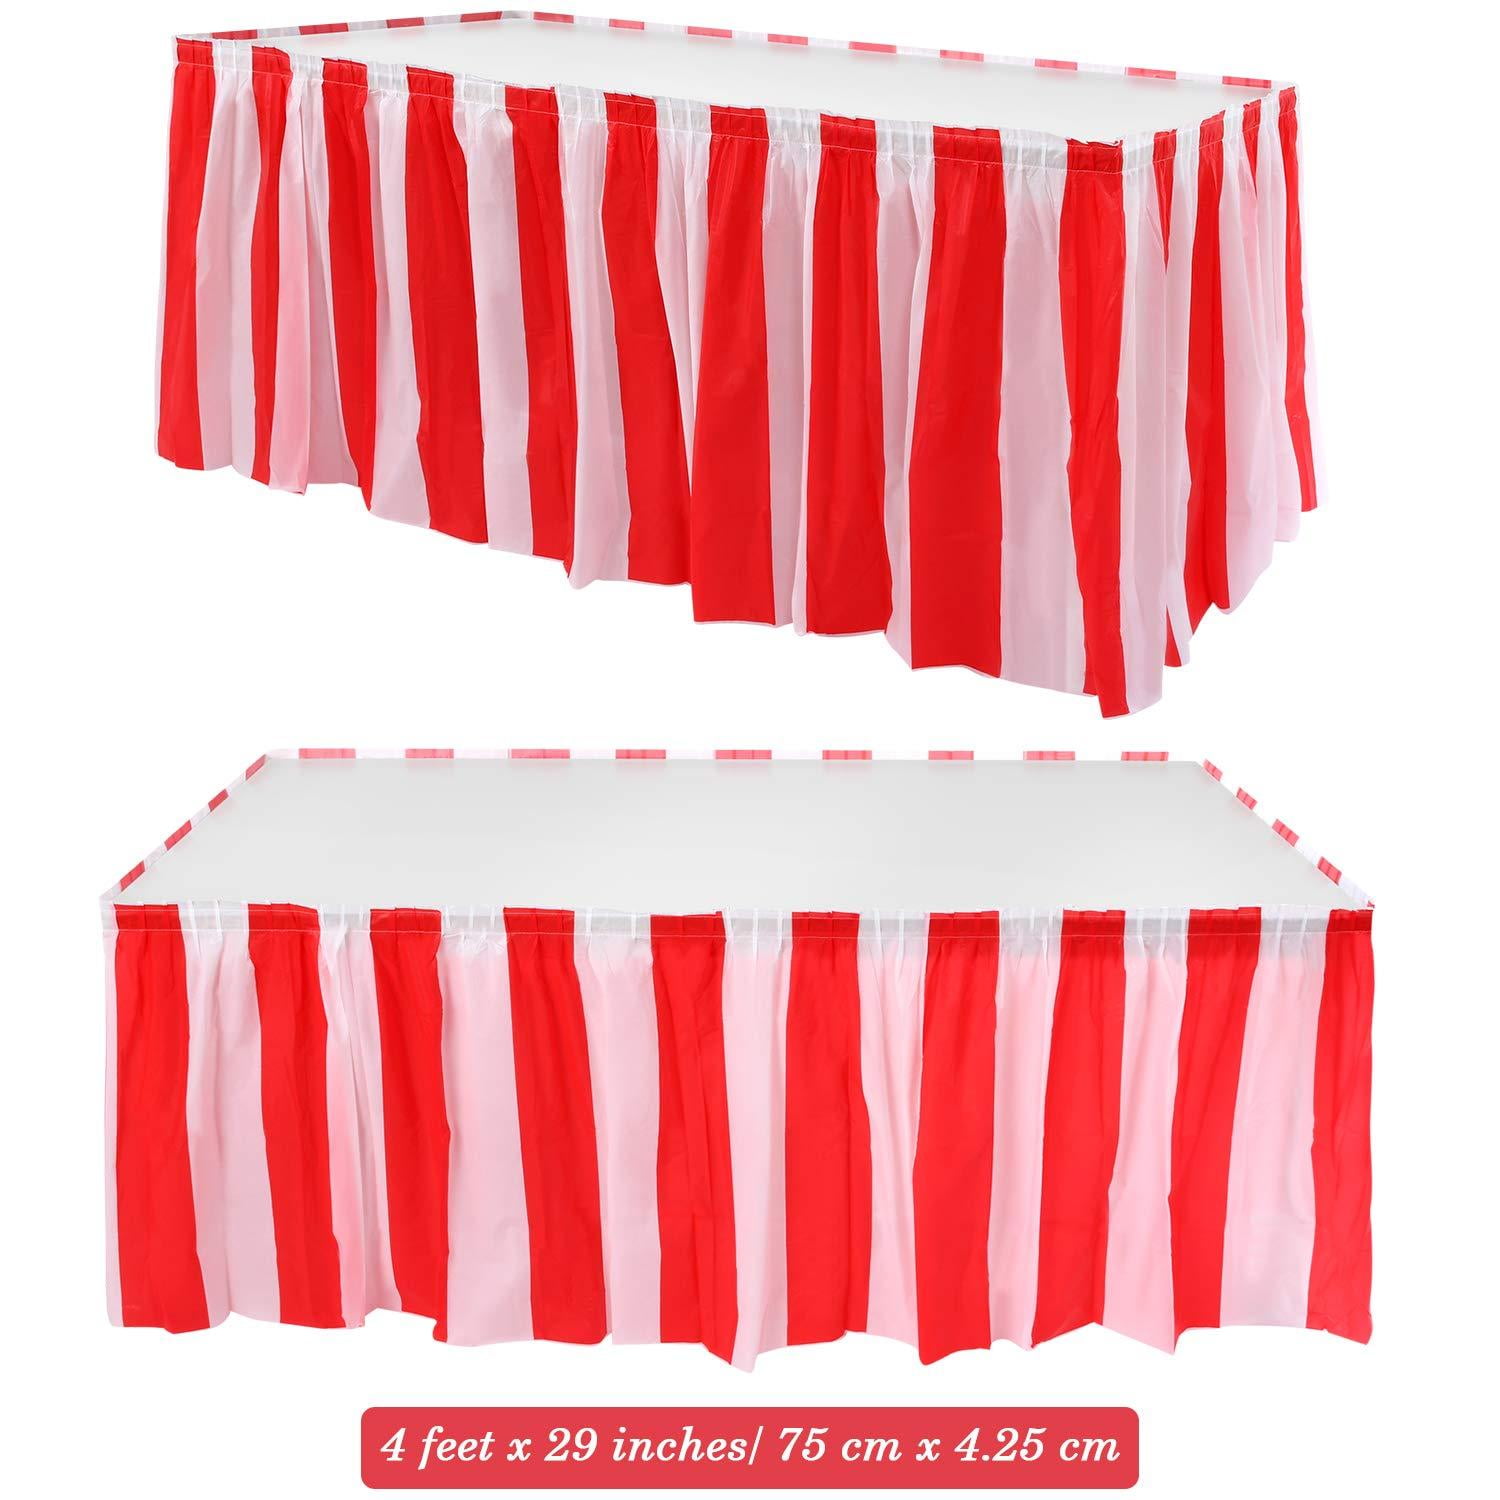 Red & White Striped Table Skirt Carnival Circus Decorations 4 Skirts